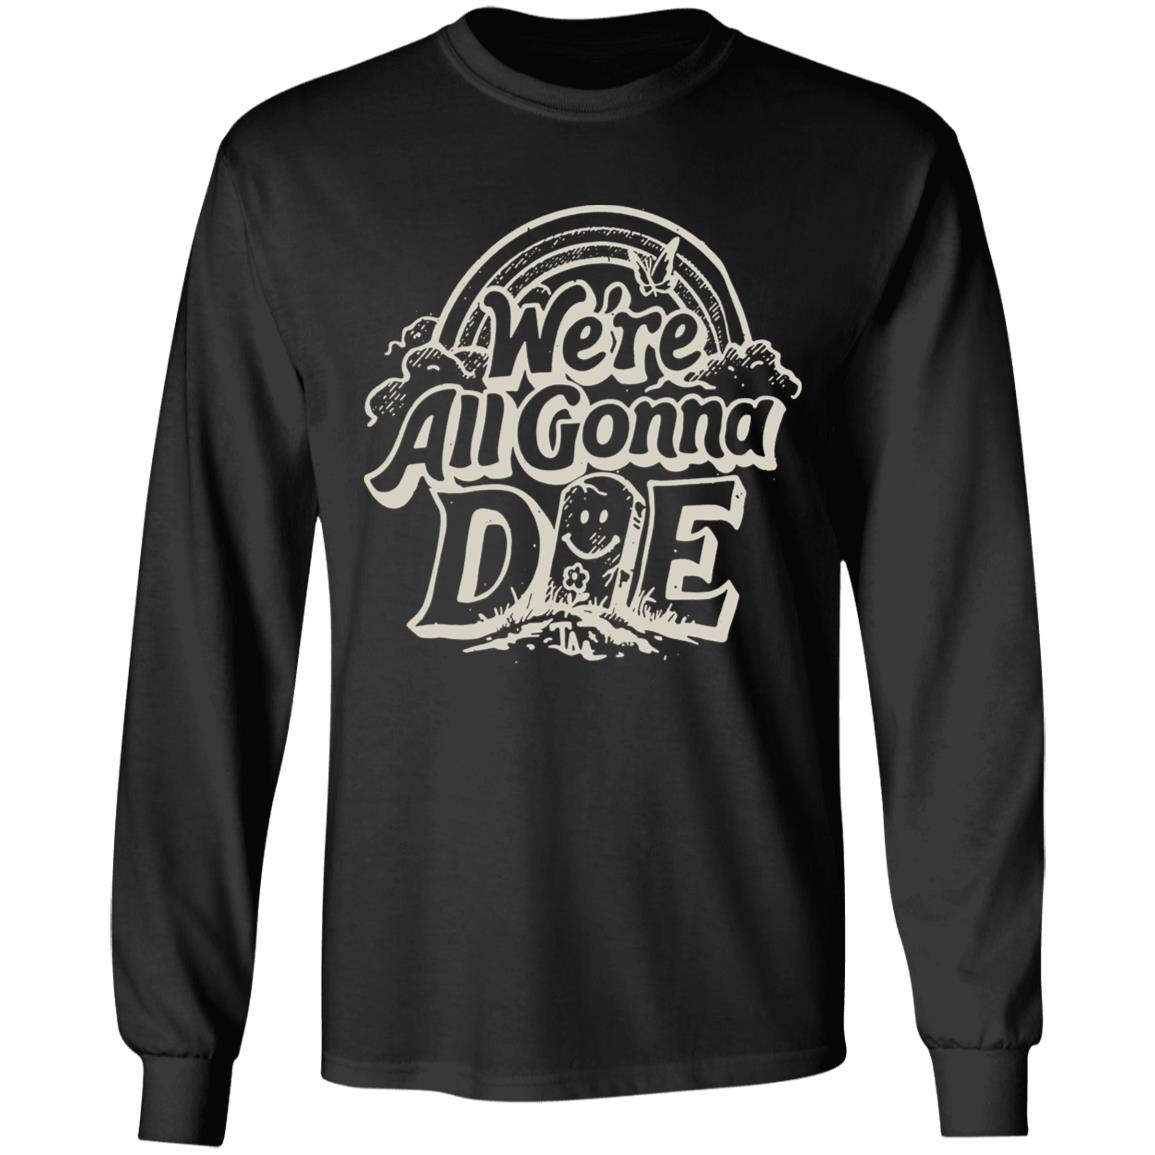 The Amity Affliction Merch Store We’re All Gonna Die Shirt